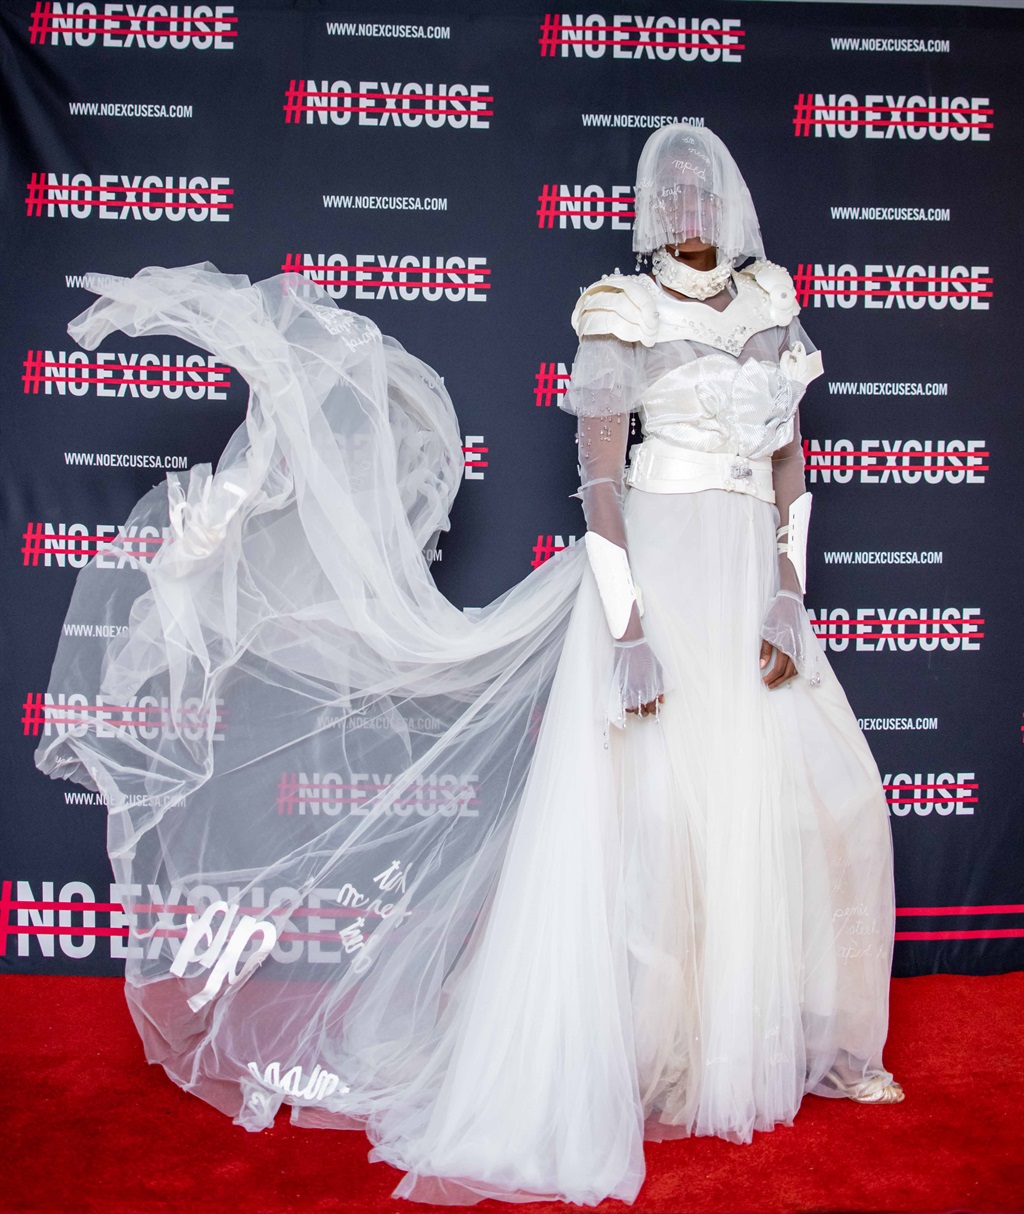 This gown created by designer Suzaan Heyns for Carling Black Label’s #NoExcuse Bride Armour campaign features data from cases of intimate partner violence. (PHOTO: Supplied)